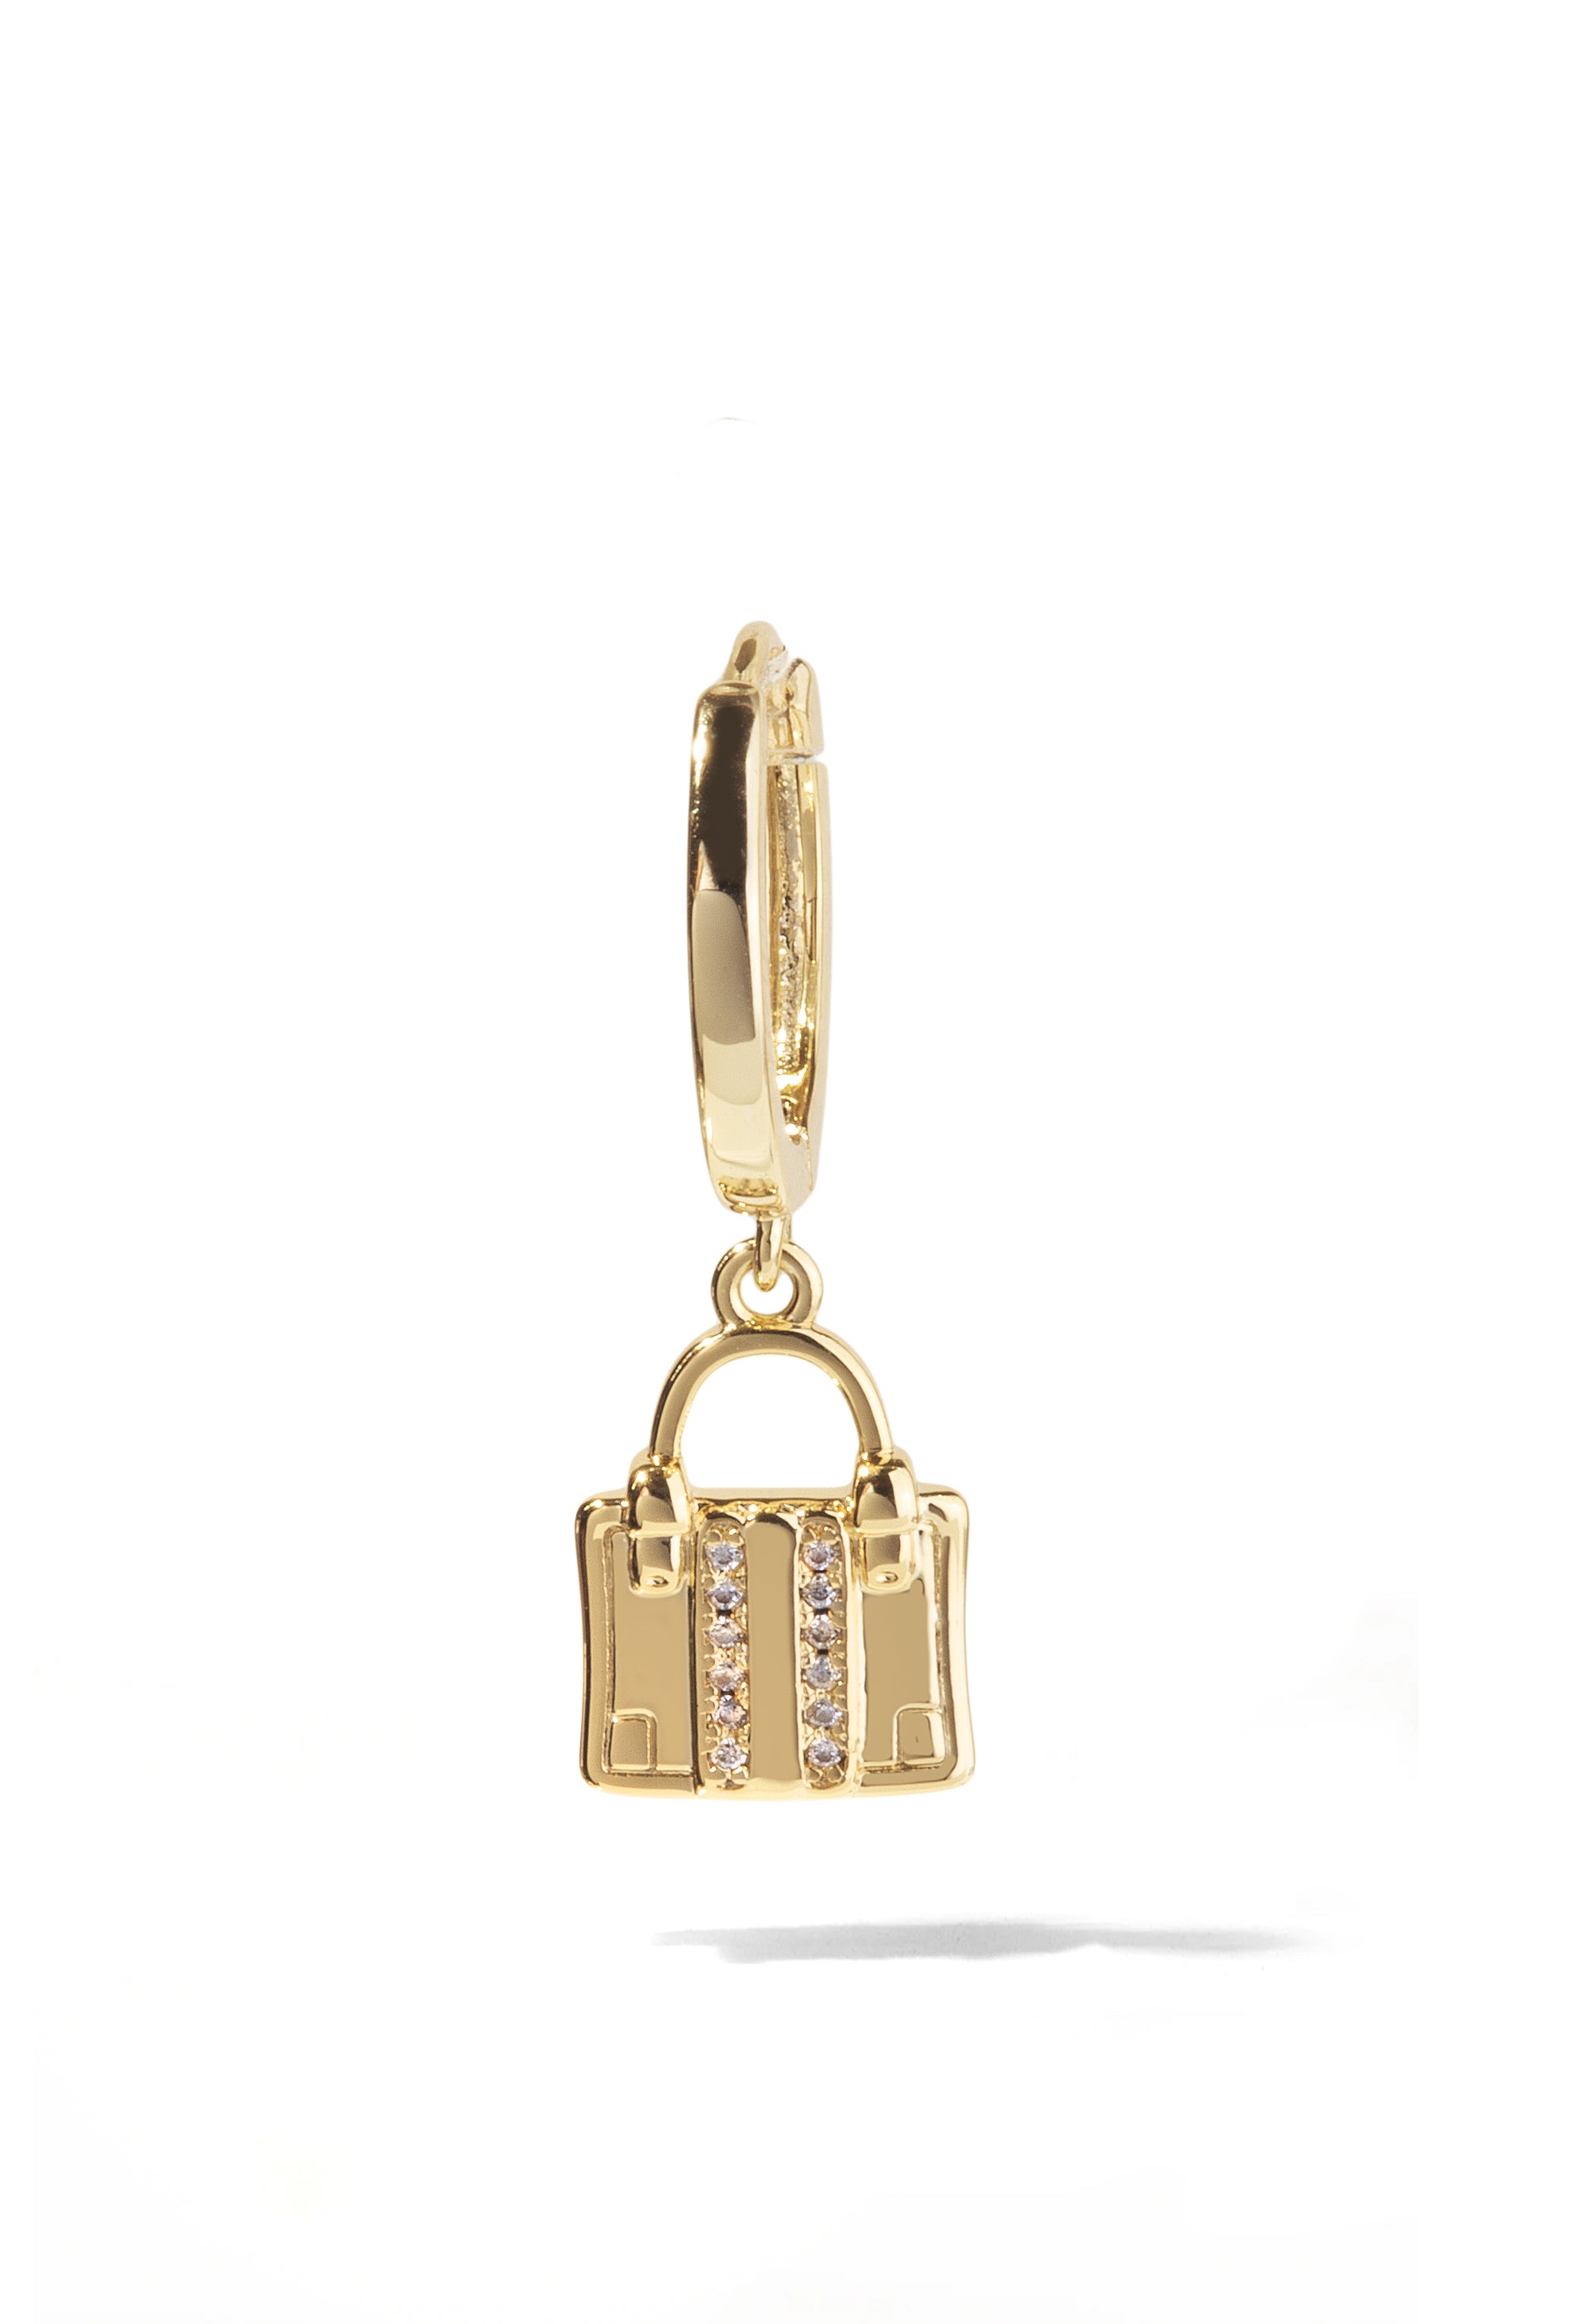 Travel Huggie Gold Charm Earring with Pavé Crystals on A Cuff Hoop | Oomiay